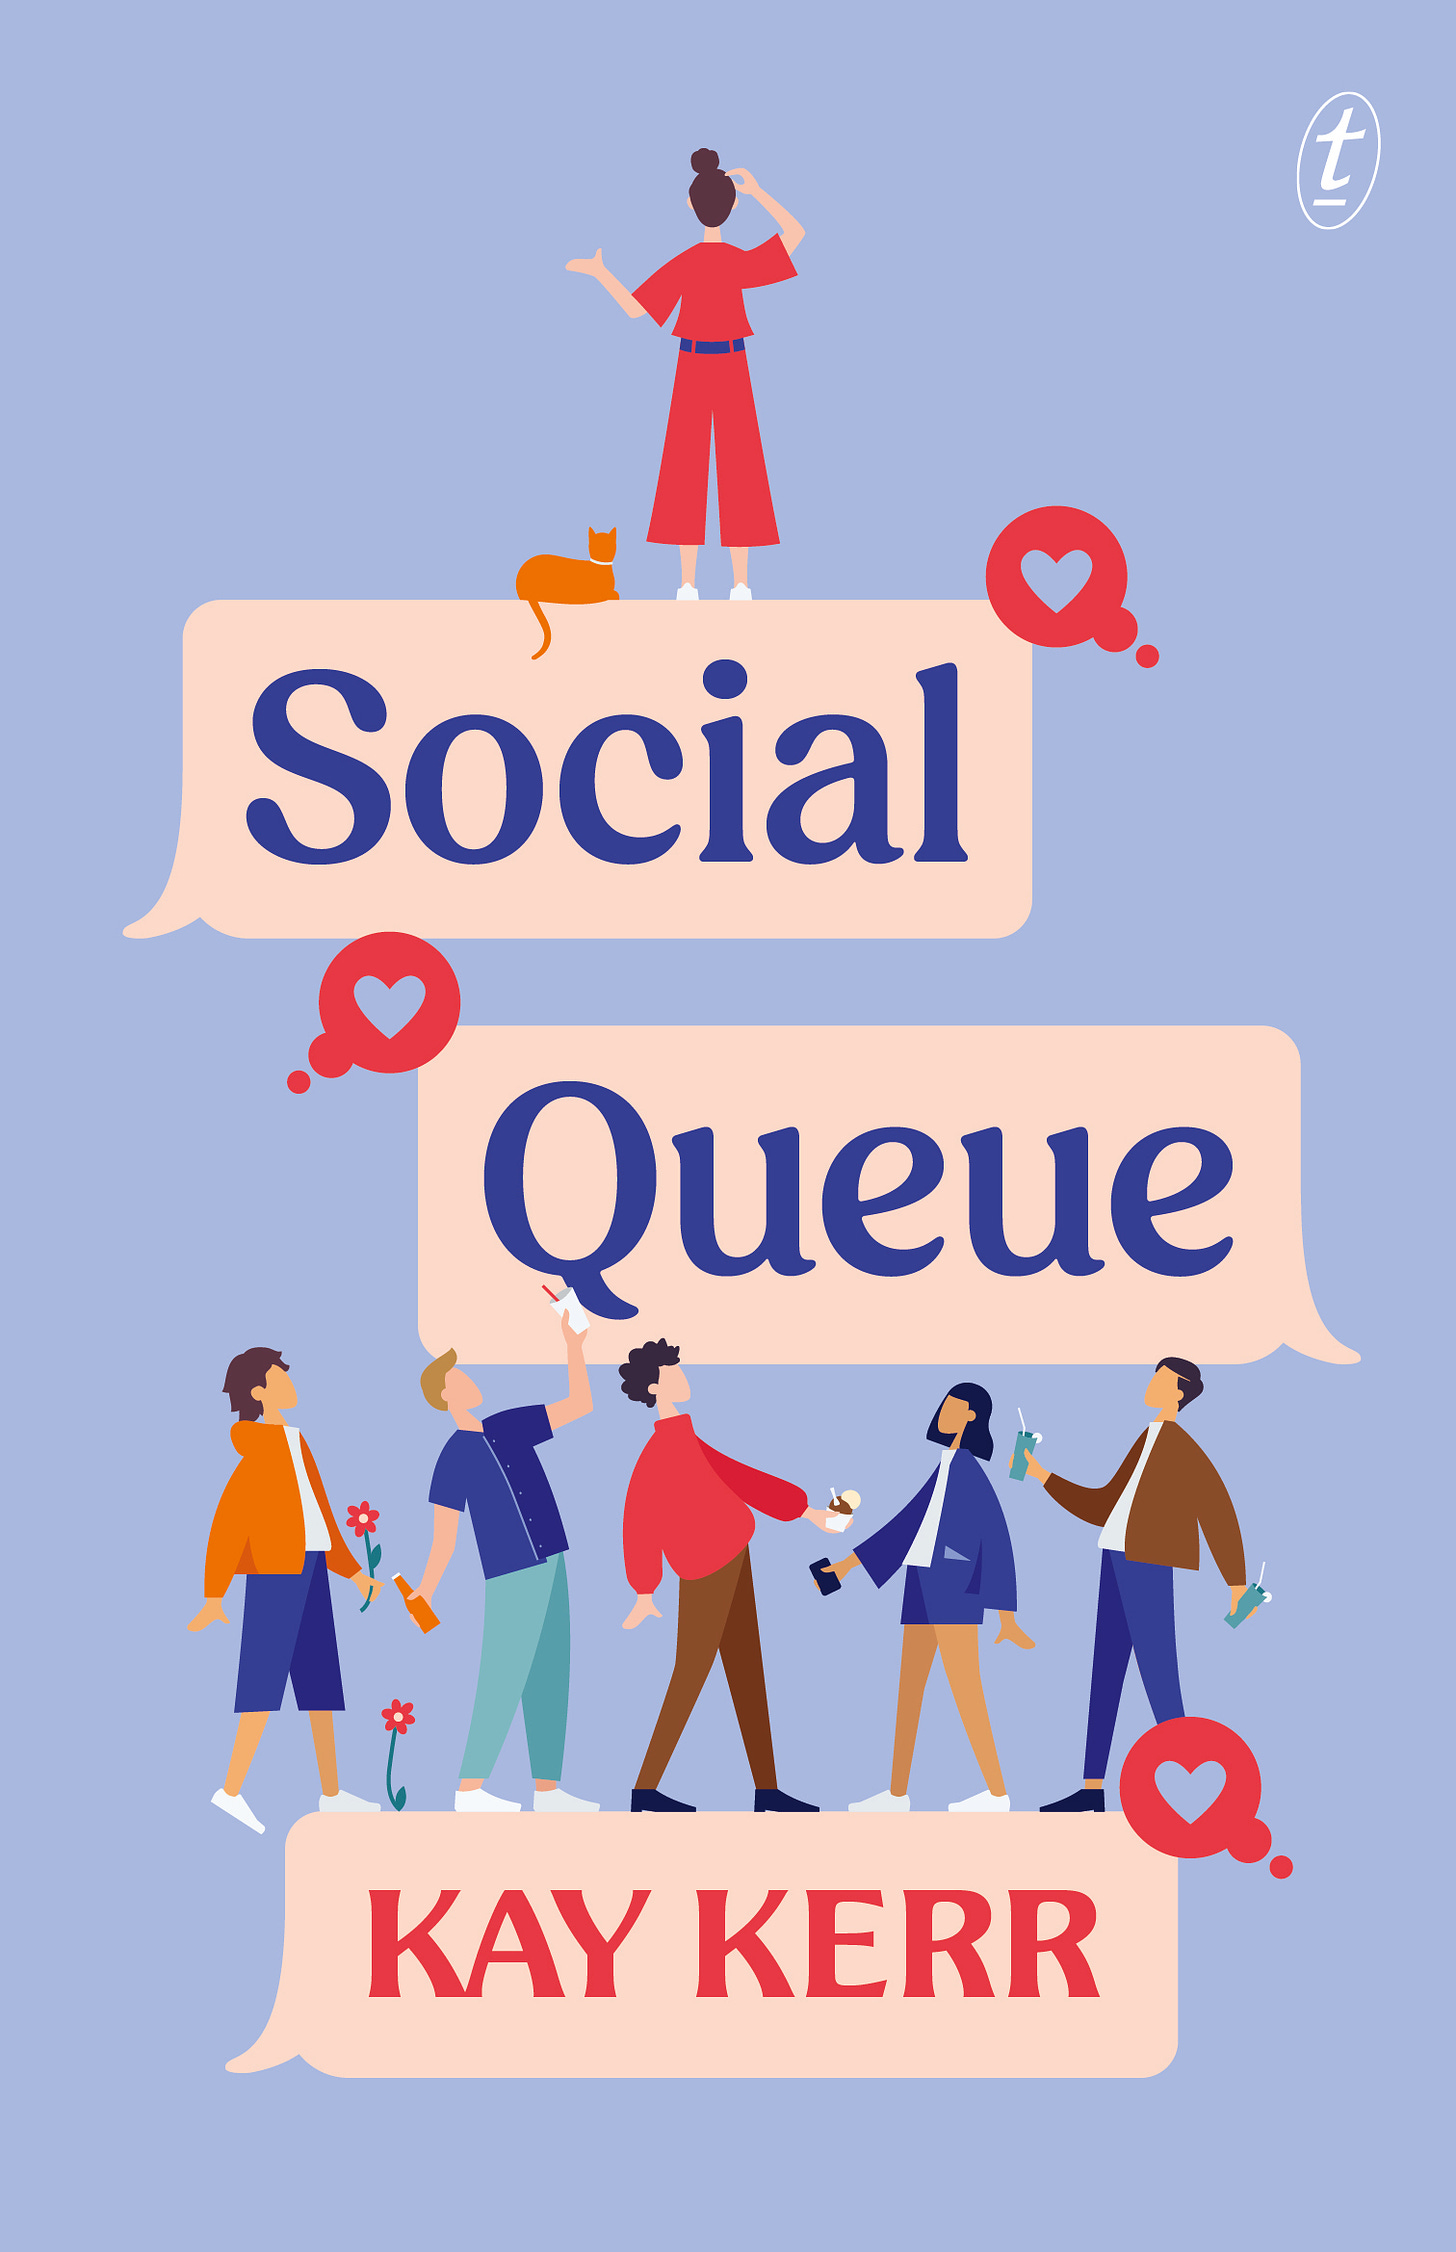 The cover for a book called 'Social Queue' by Kay Kerr. It is light blue, with illustrations of a girl at the top of the cover looking around, and five people below who are looking up at her.